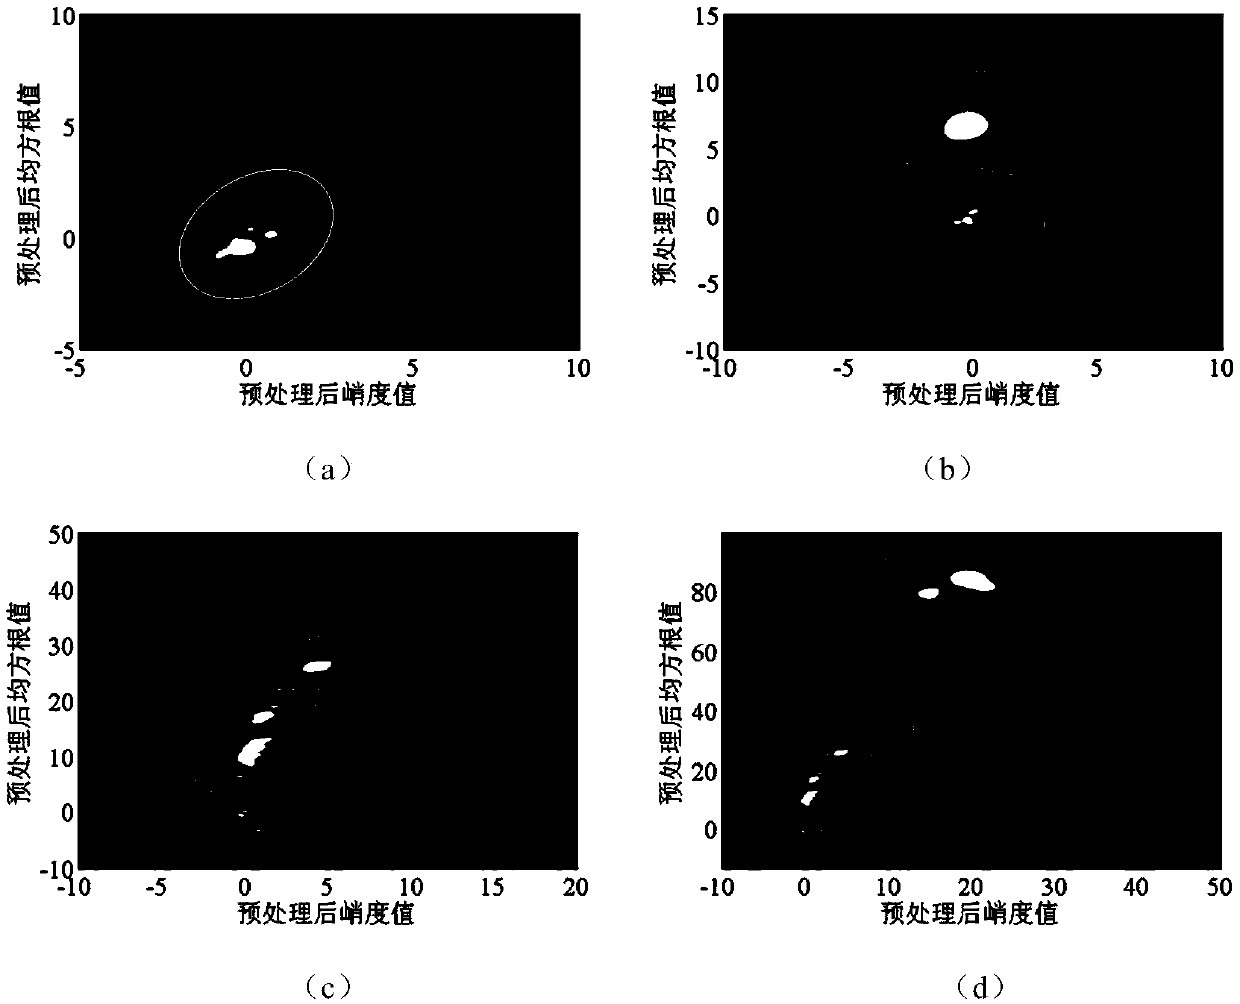 A Visual Dynamic Evaluation Method of Rolling Bearing Reliability Based on Statistics by Class